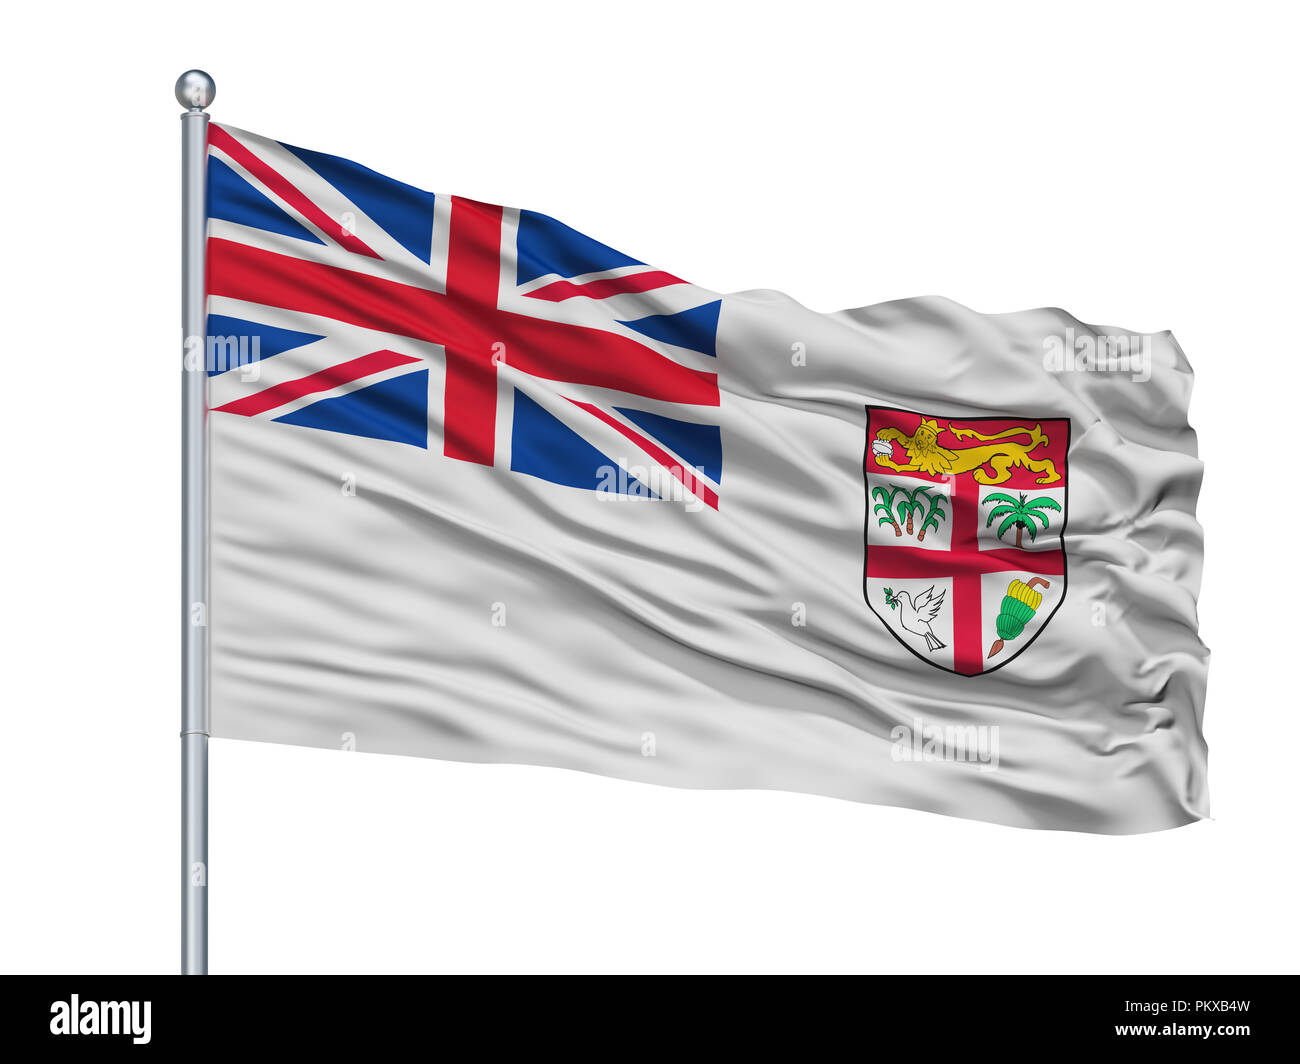 Fiji Naval Ensign Flag On Flagpole, Isolated On White Background, 3D Rendering Stock Photo